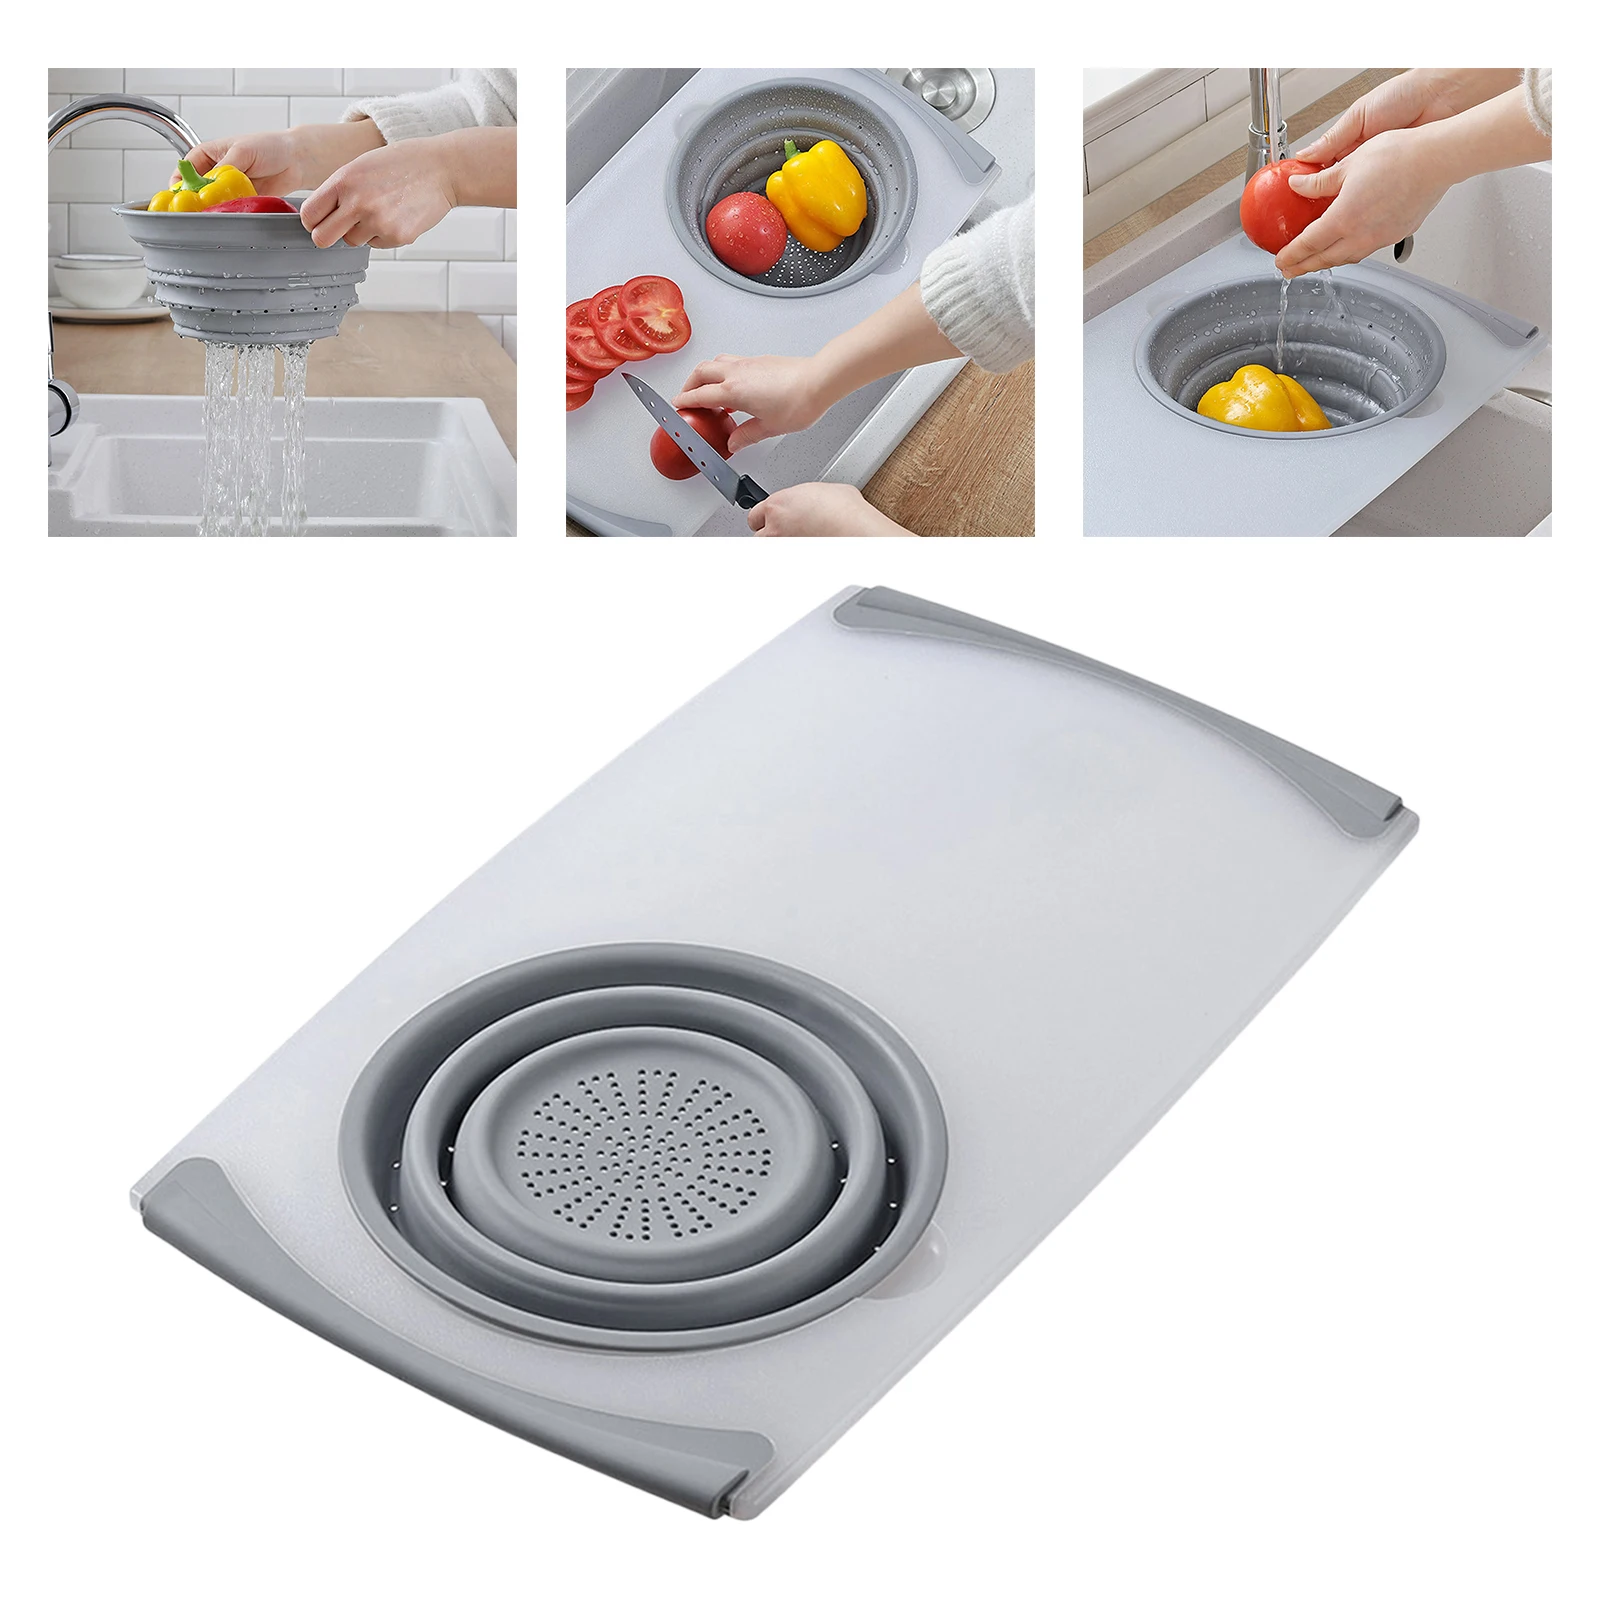 3 in 1 Innovative Cutting Board Collapsible Drain Basket Vegetable Non-slip Household